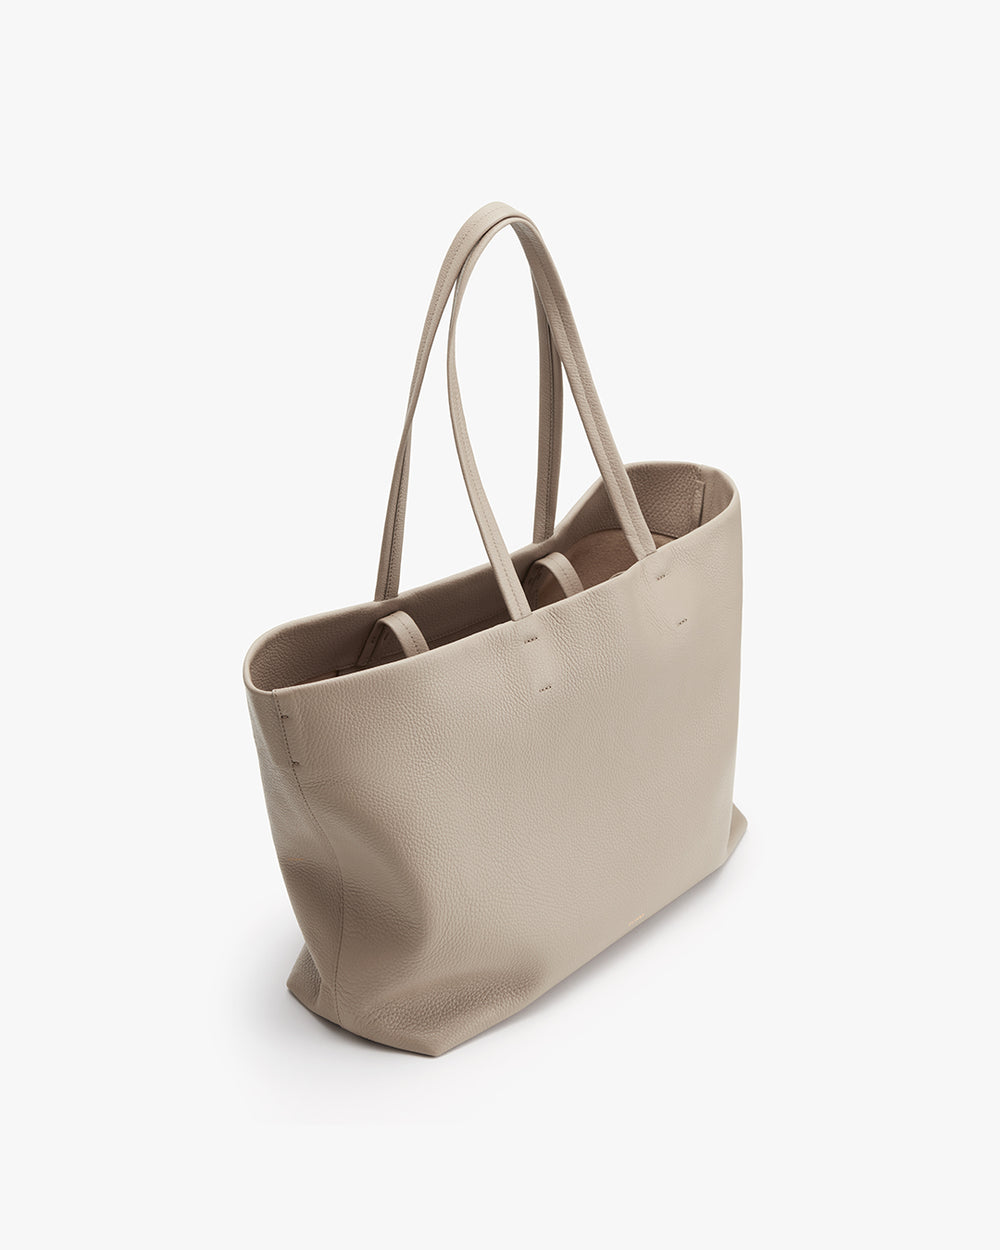 Standing tote bag with two handles and a plain design.